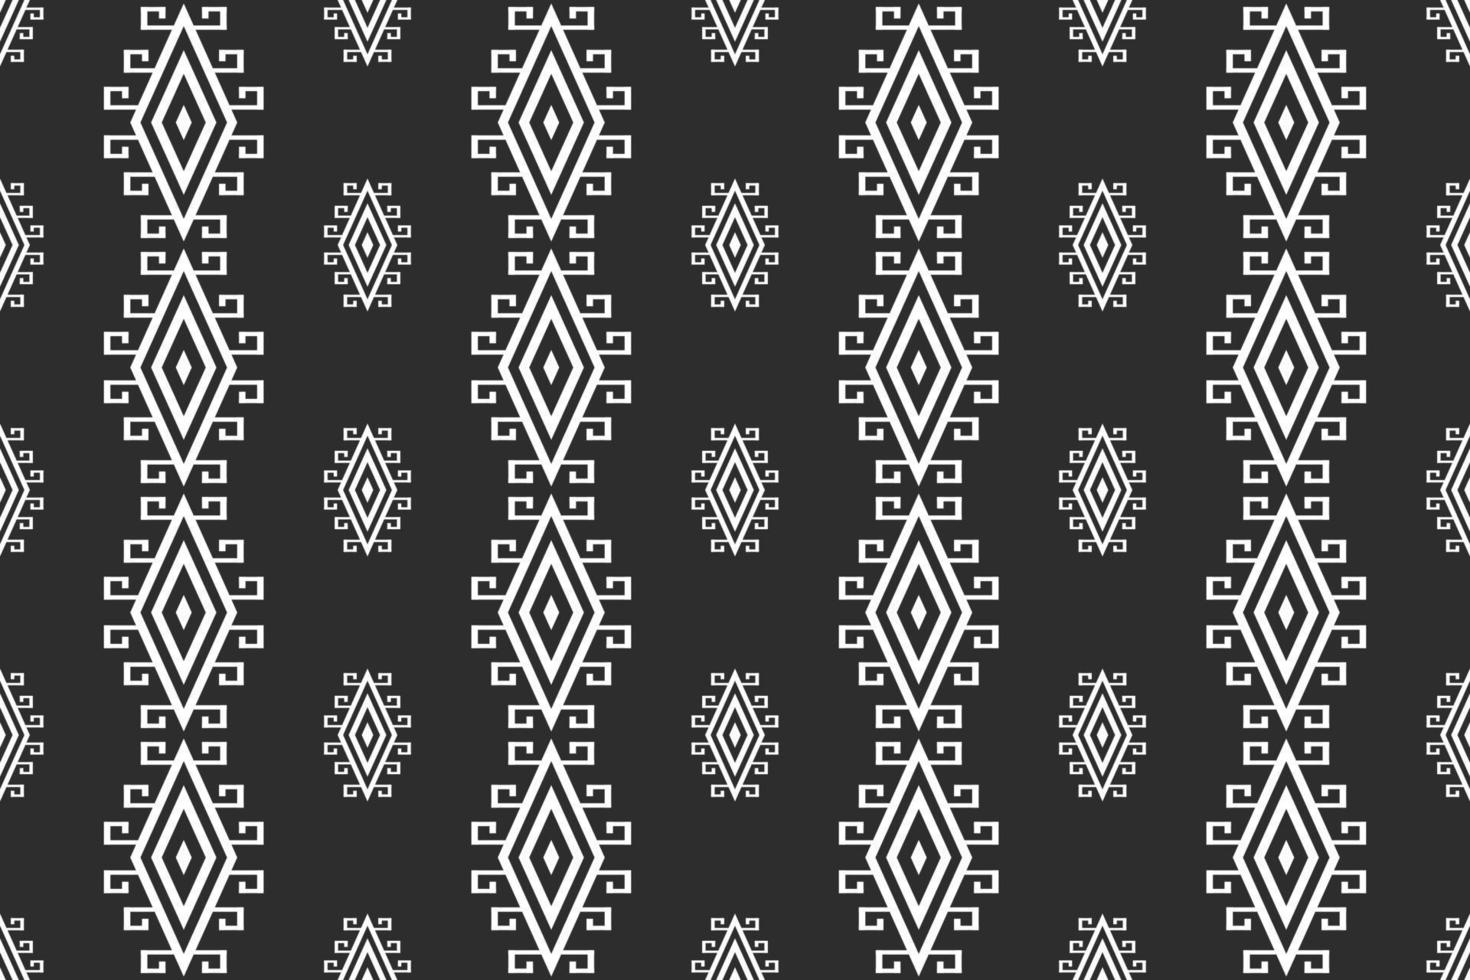 oriental ethnic geometric pattern south africa traditional design for background rug,wallpaper,shirt,batik,pattern,vector,illustration,embroidery vector